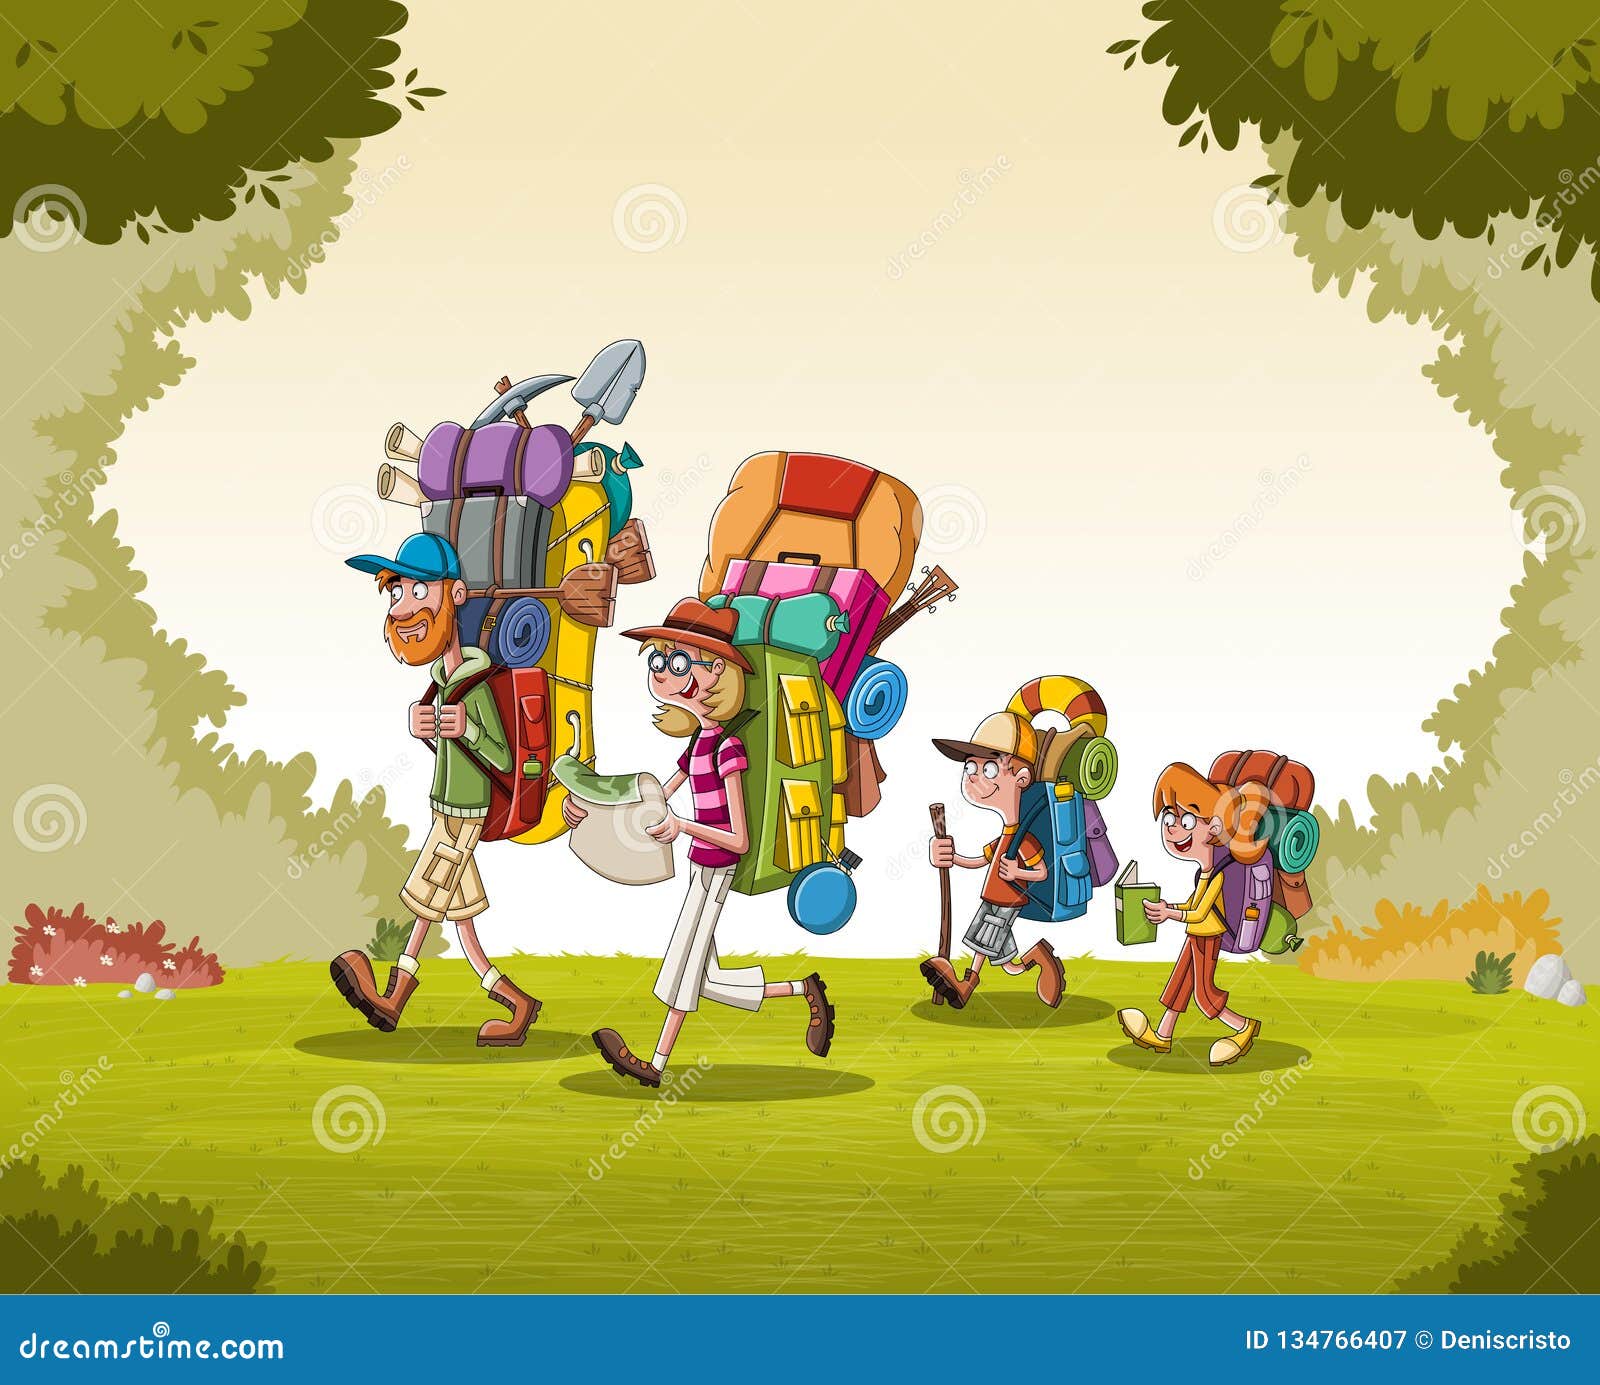 Cartoon Family with Big Backpacks on Green Park. People Hiking on Nature  Background Stock Vector - Illustration of character, adventure: 134766407